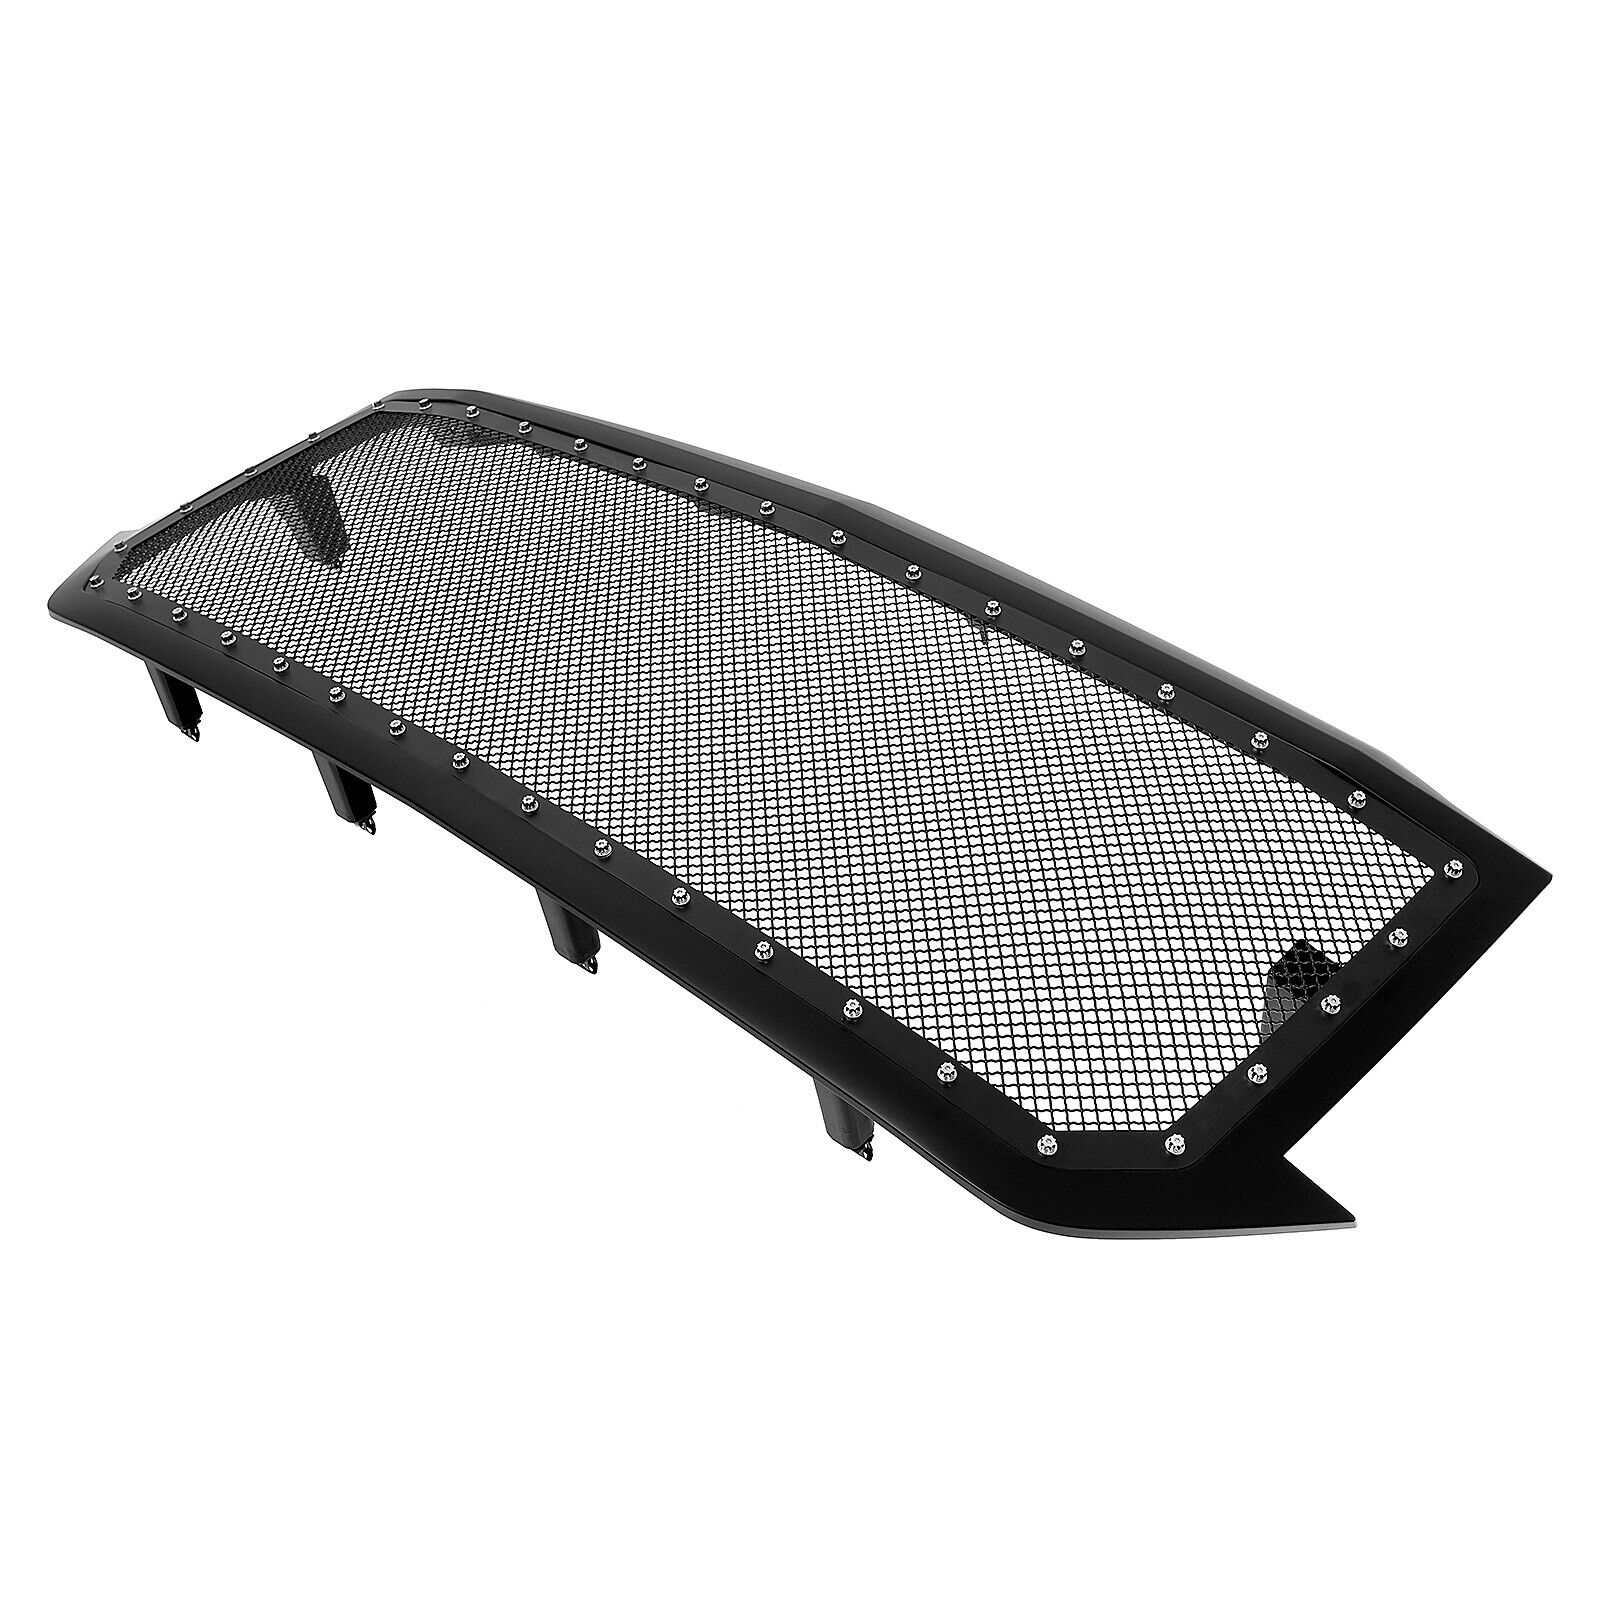 For 16-18 Chevy Silverado 1500/19 LD Upper Stainless Mesh Grille Black Shell